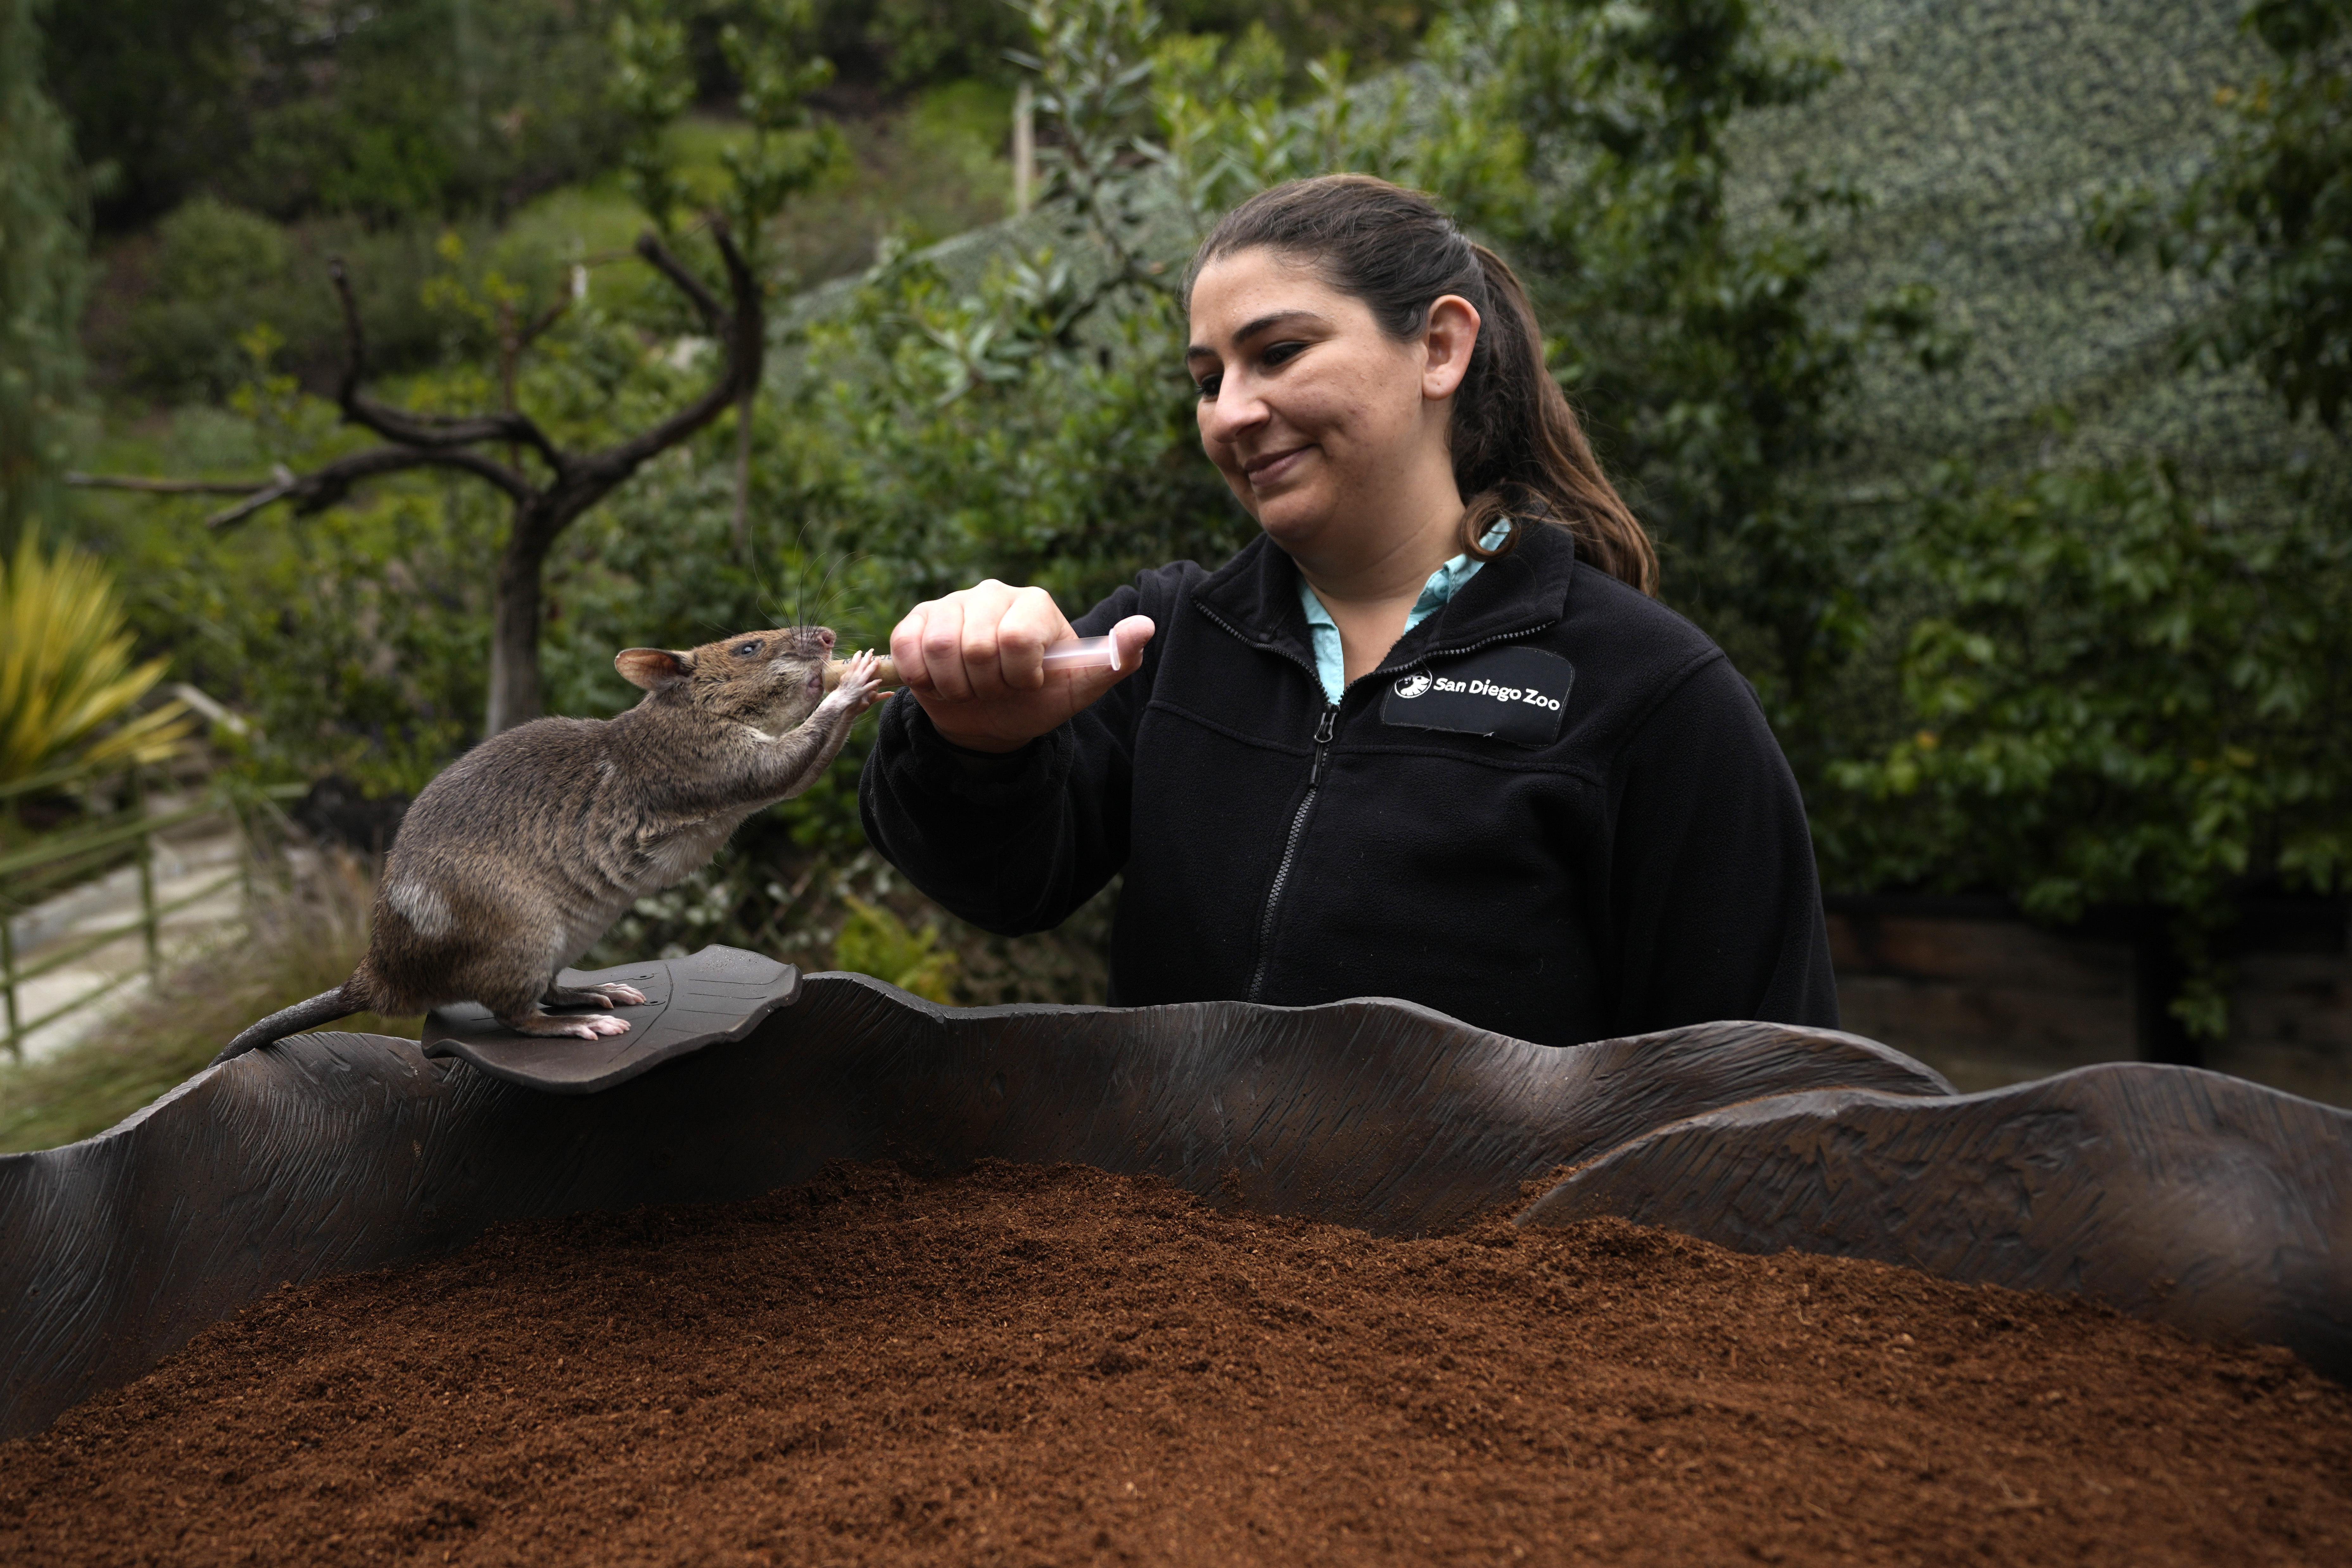 San Diego Zoo wildlife care specialist Lauren Credidio provides a treat to Runa after she searched and found a pouch of chamomile tea during a presentation at the zoo Thursday, April 13, 2023, in San Diego. African giant pouched rats like Runa are best known for ferreting out landmines and other explosive material on old battlefields in Angola, Mozambique and Cambodia, earning them the nickname “hero-rats.” Efforts are underway to expand the use of their keen sense of smell to finding people trapped in collapsed buildings, detecting diseases in laboratory samples and alerting officials to illegal goods at ports and airports. (AP Photo/Gregory Bull)